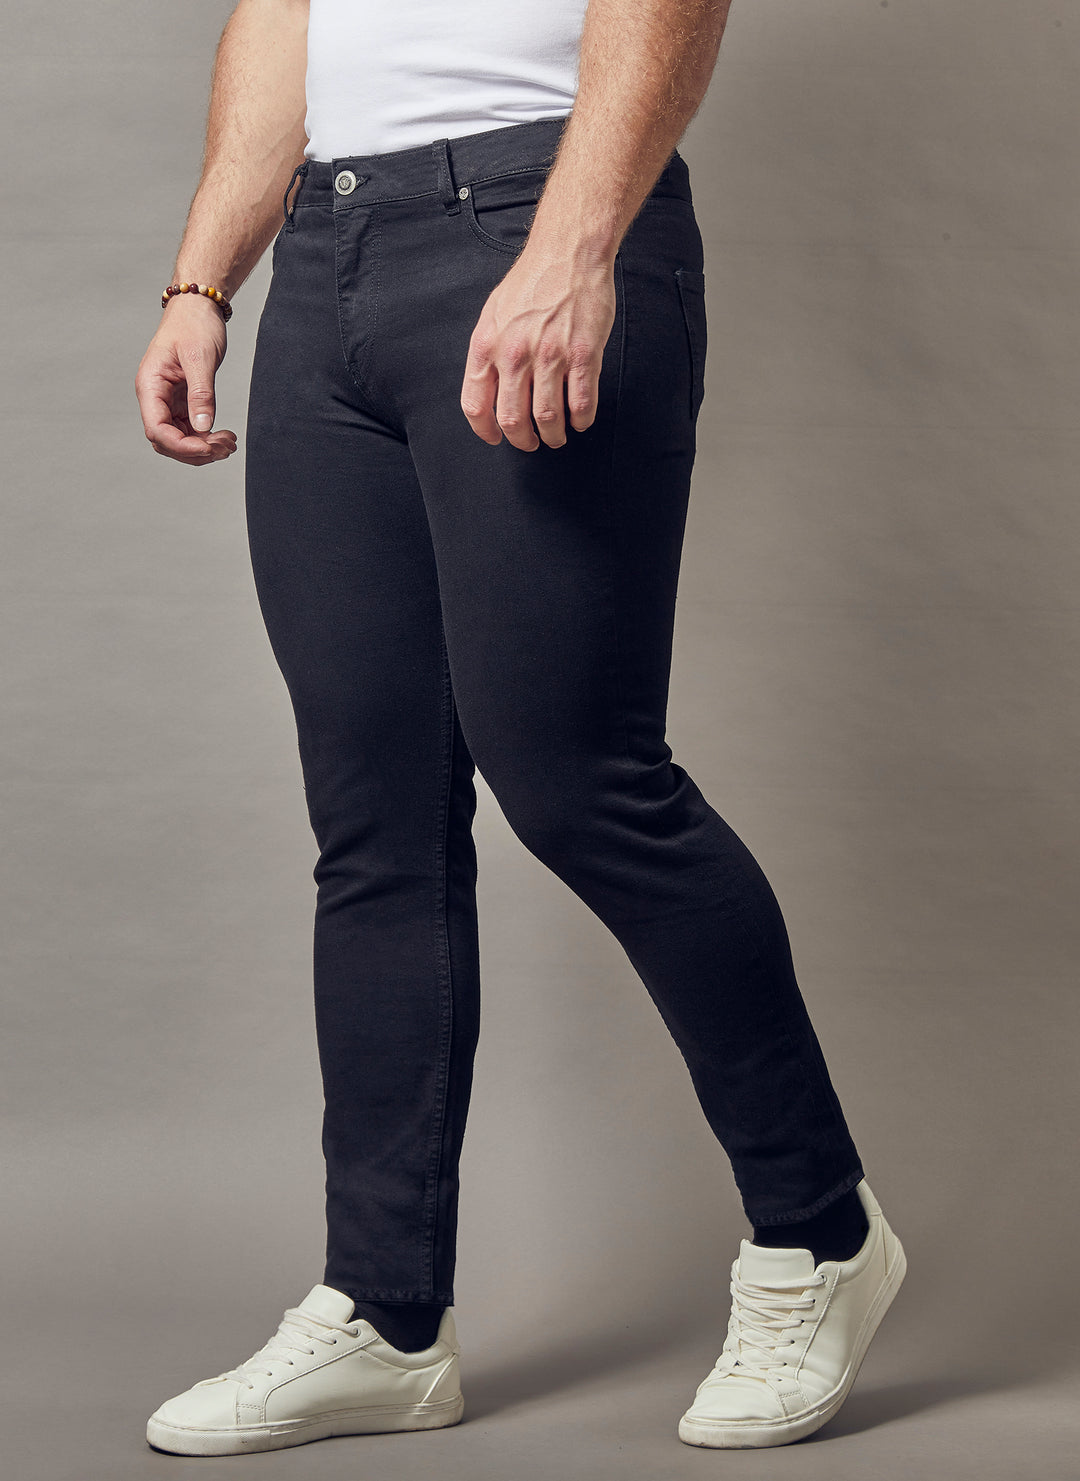 Athletic Fit Stretch Jeans - Navy